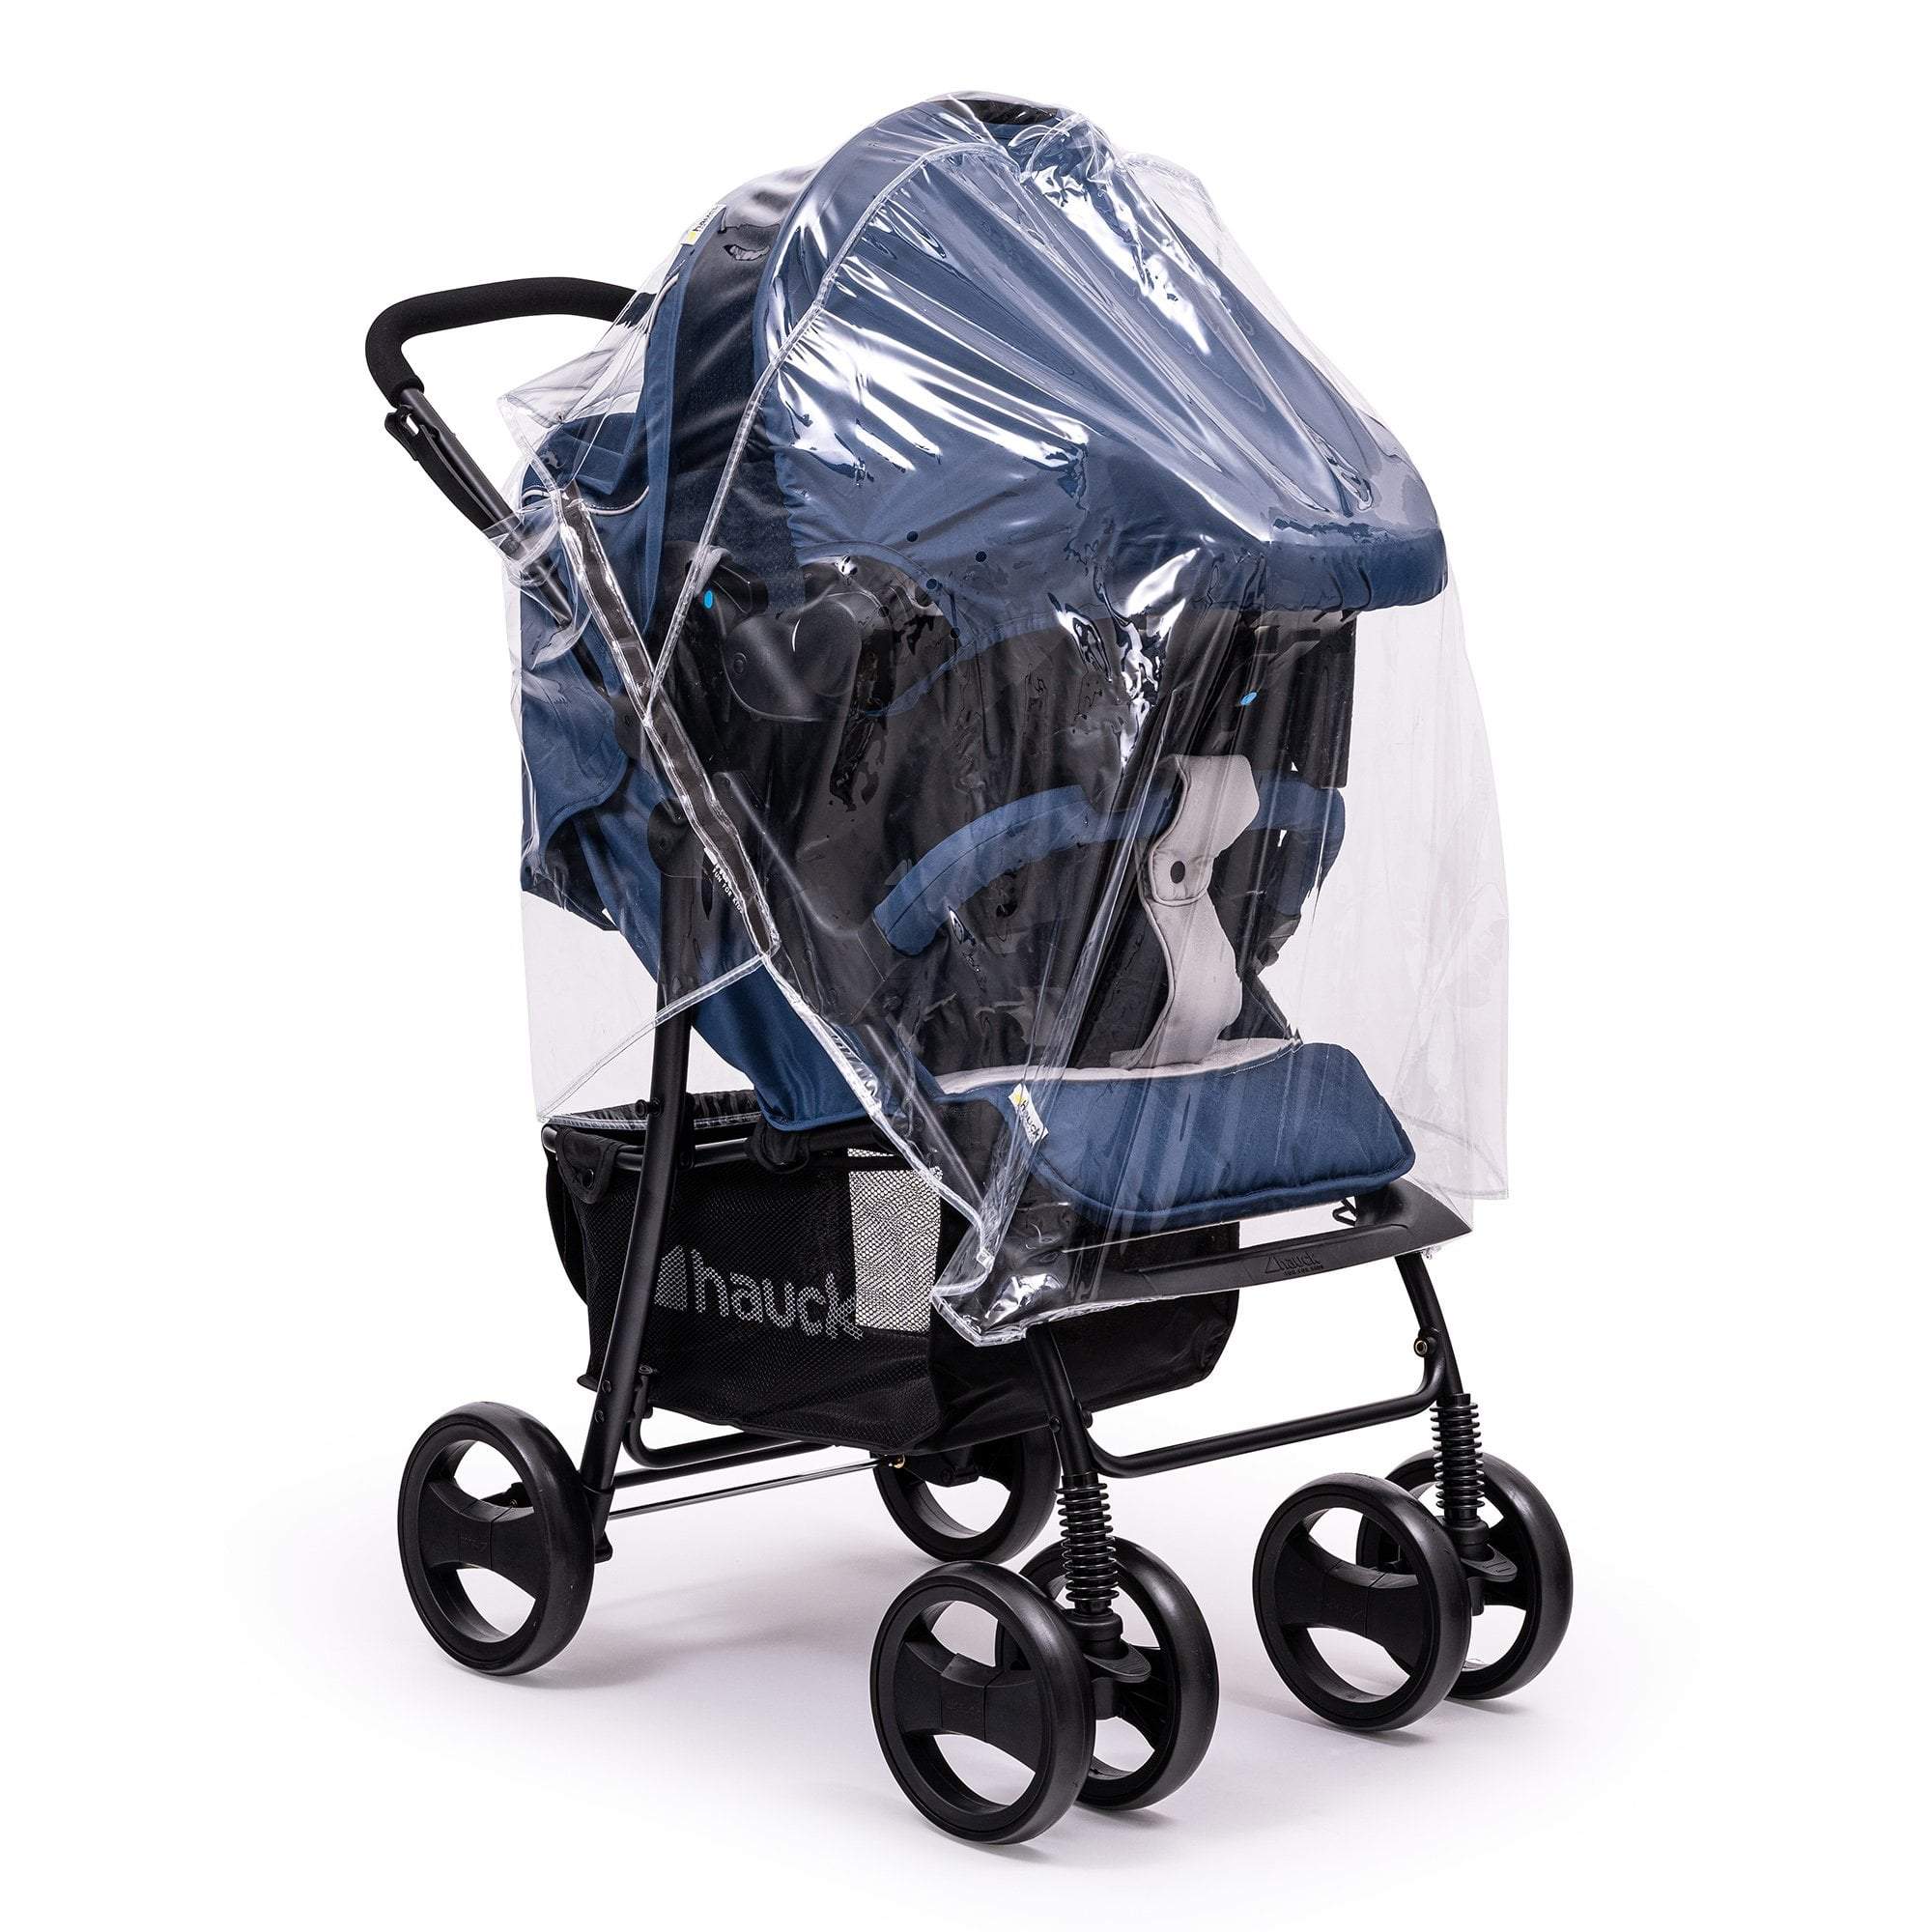 Travel System Raincover Compatible with Diono - Fits All Models - For Your Little One